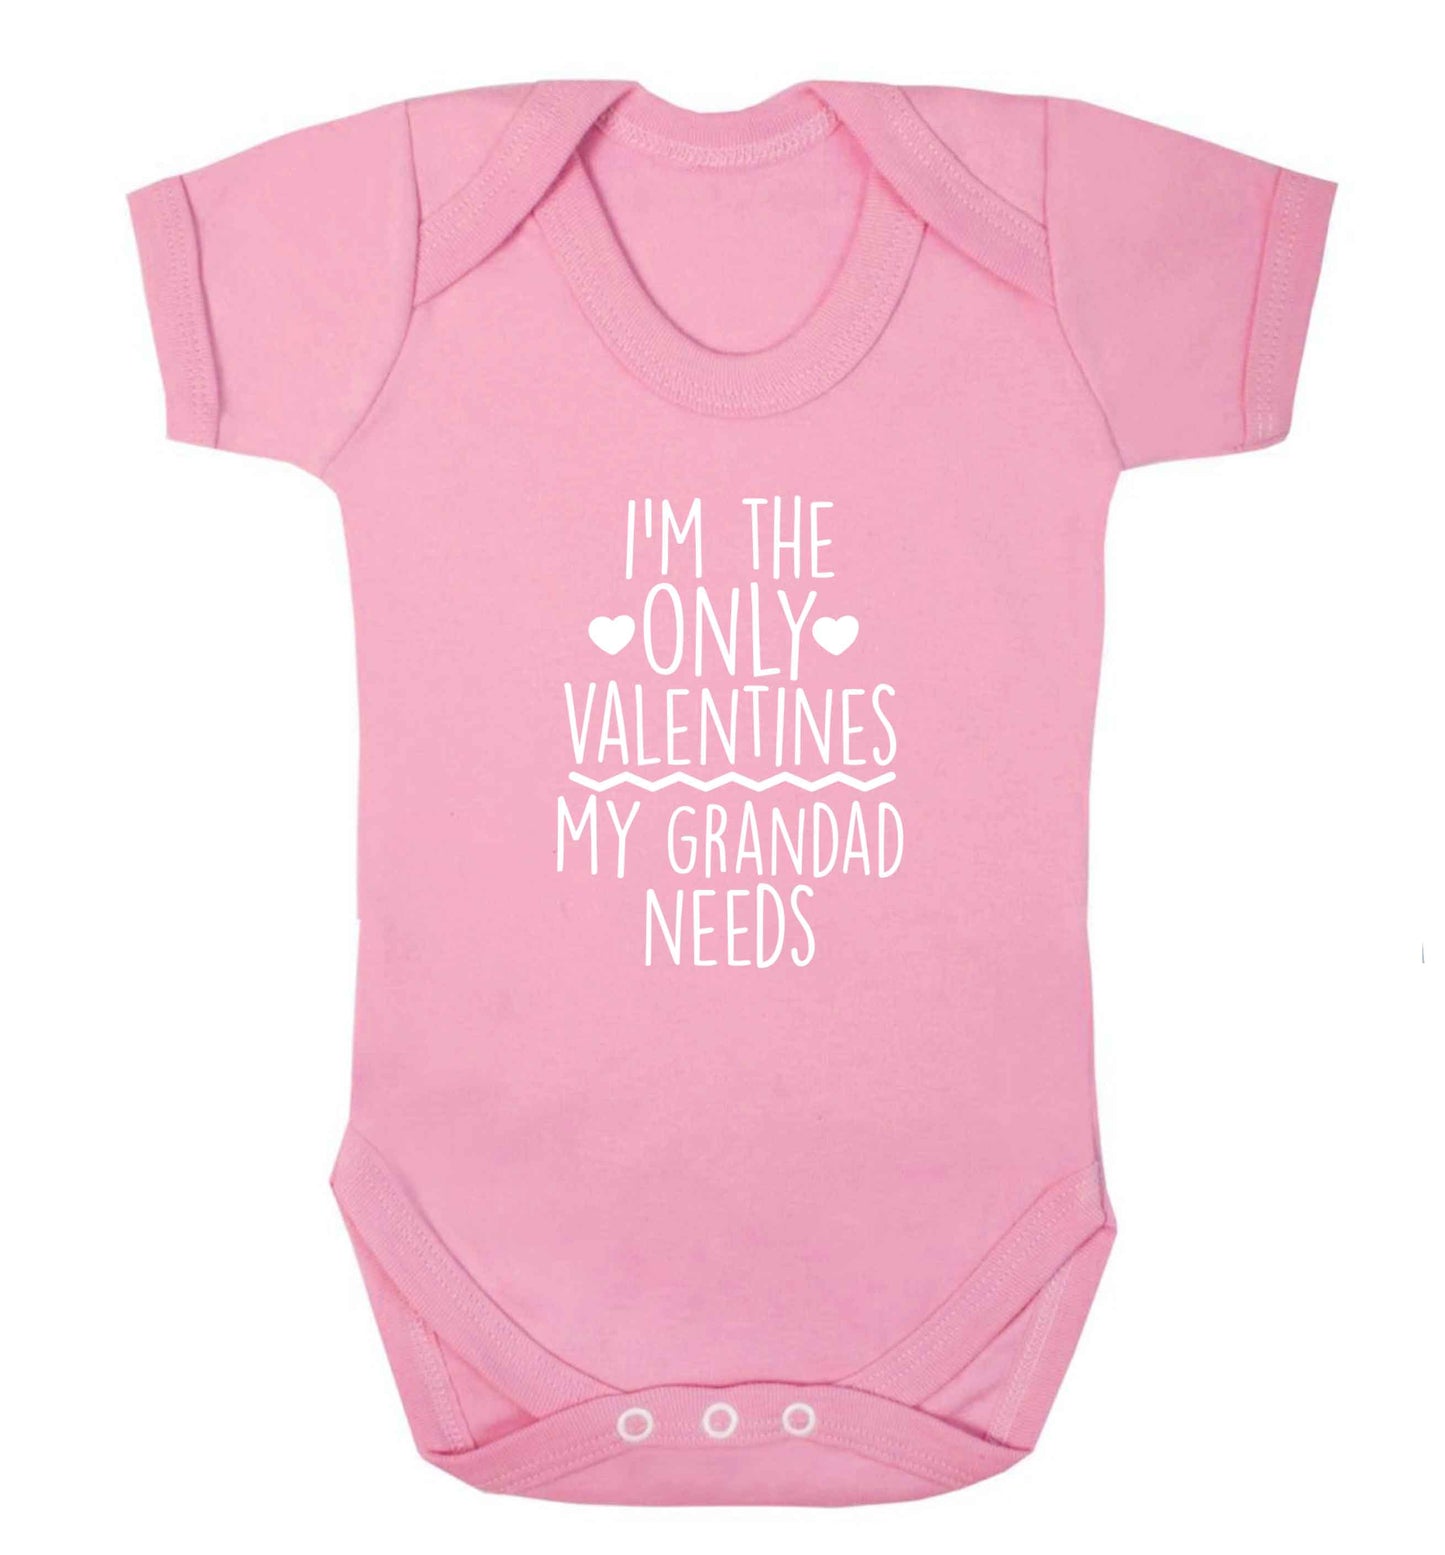 I'm the only valentines my grandad needs baby vest pale pink 18-24 months